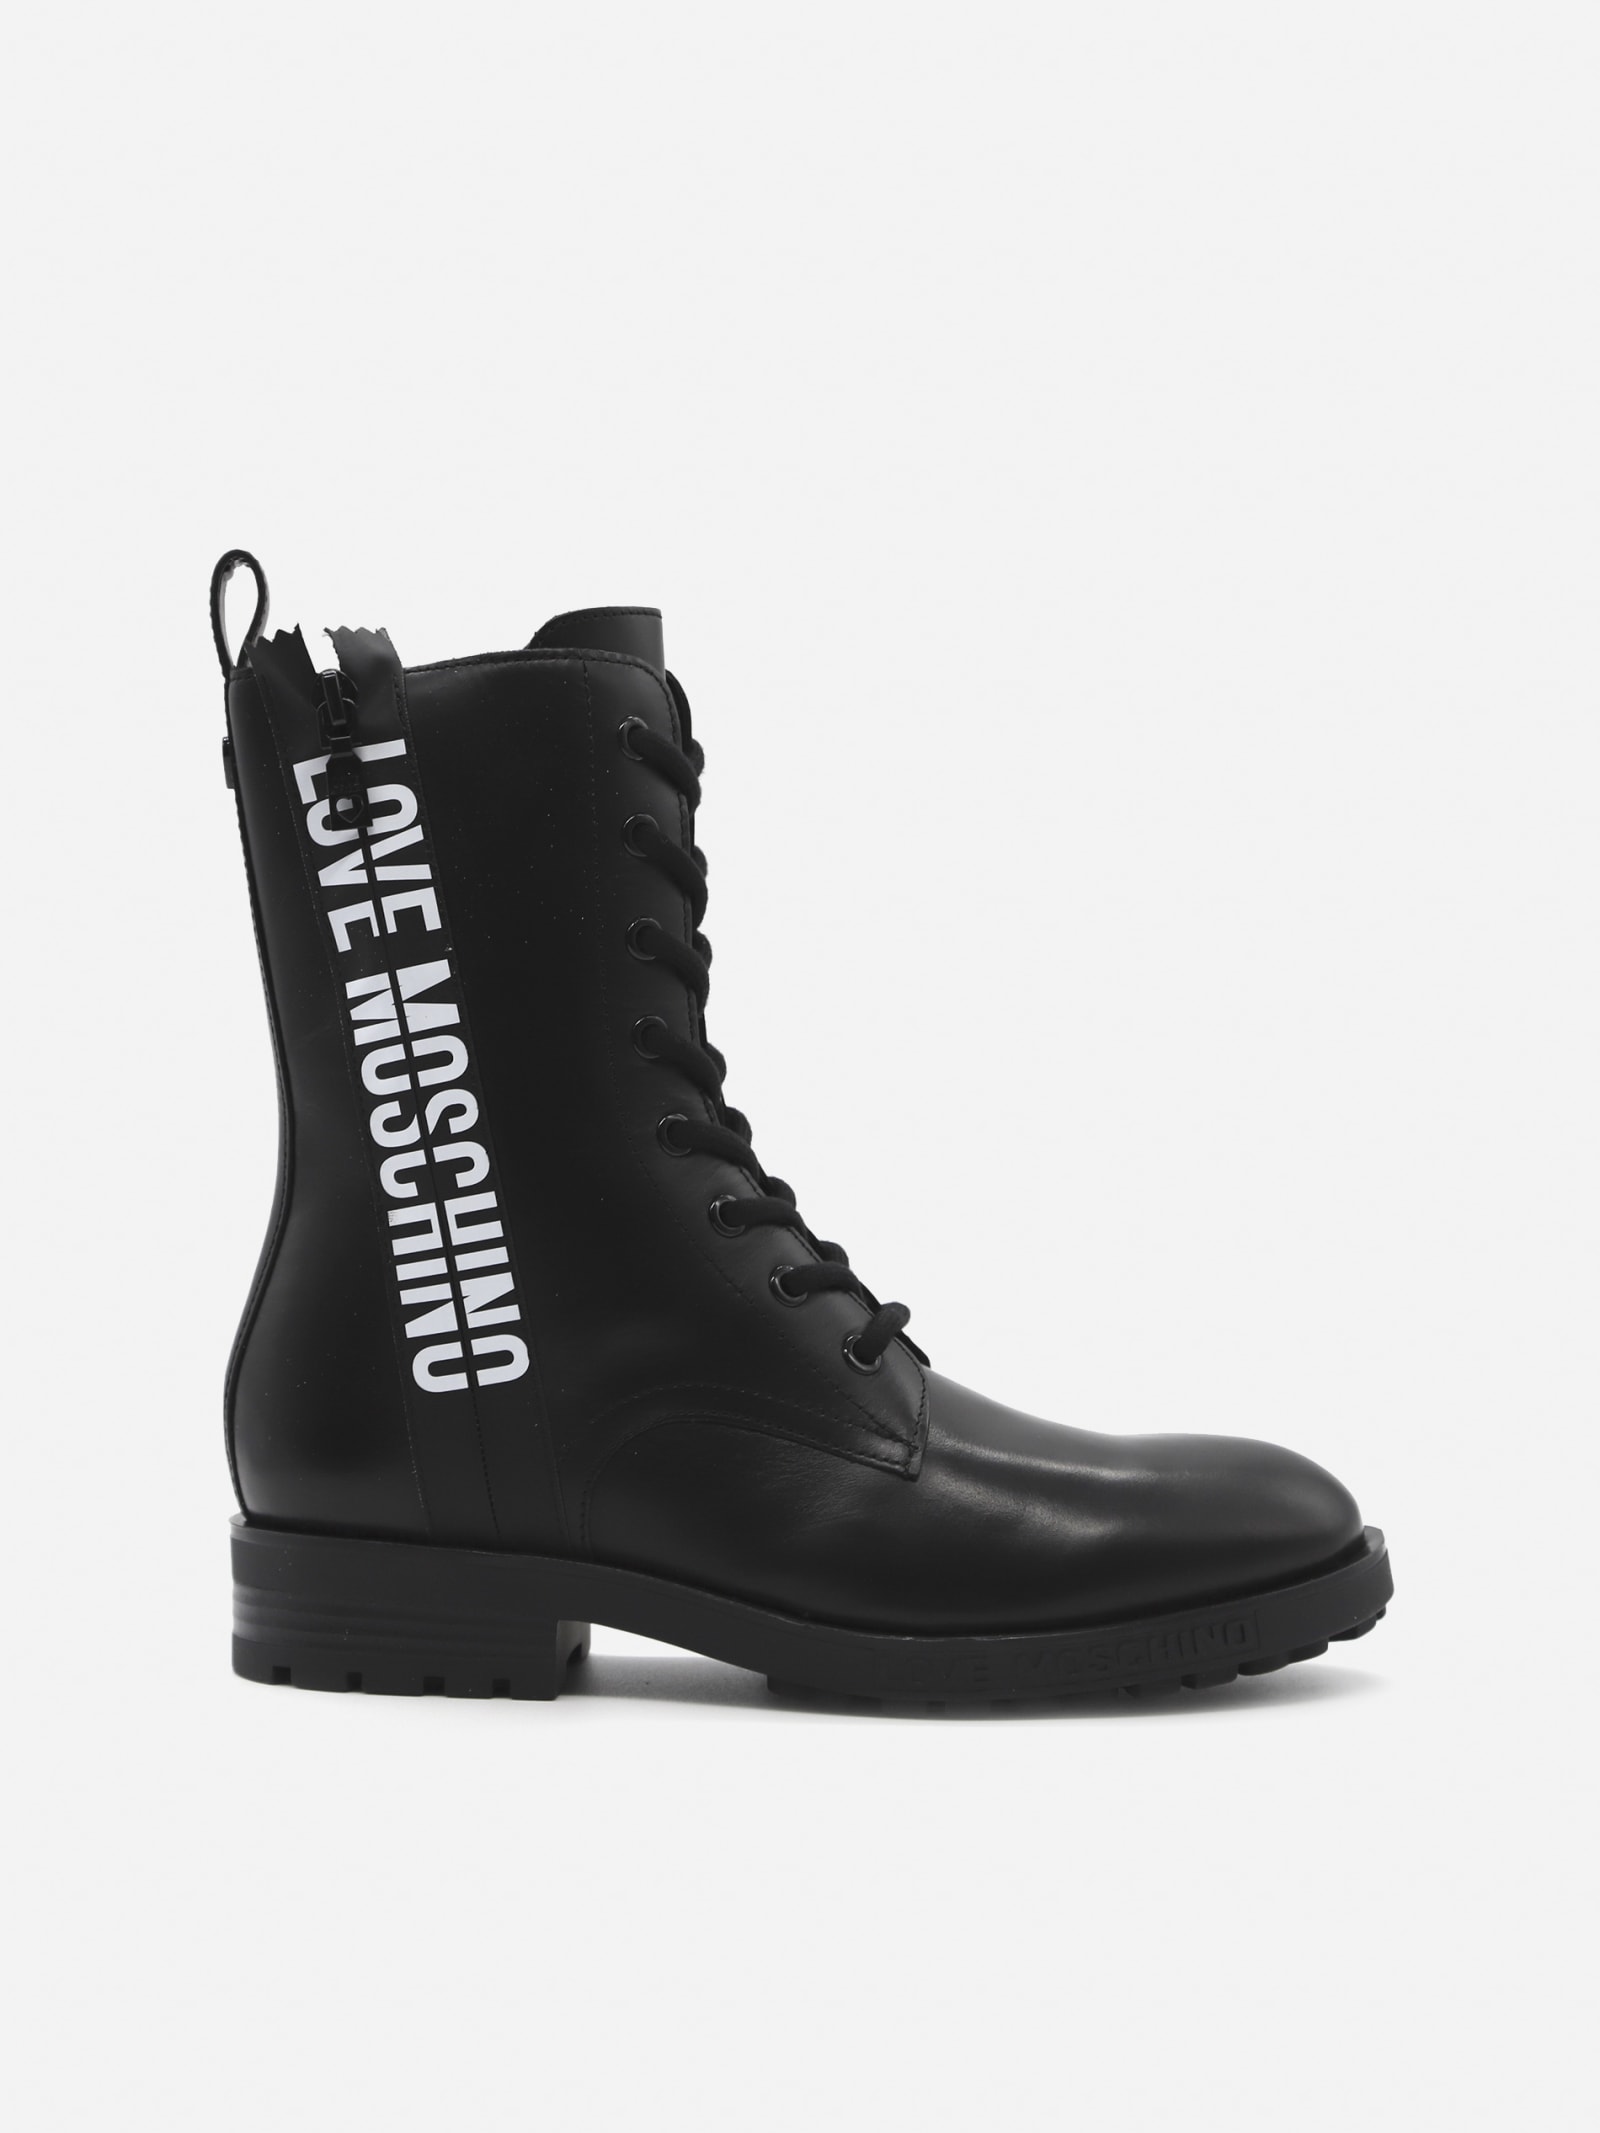 Buy Love Moschino Leather Ankle Boots With Contrasting Logo Band online, shop Love Moschino shoes with free shipping